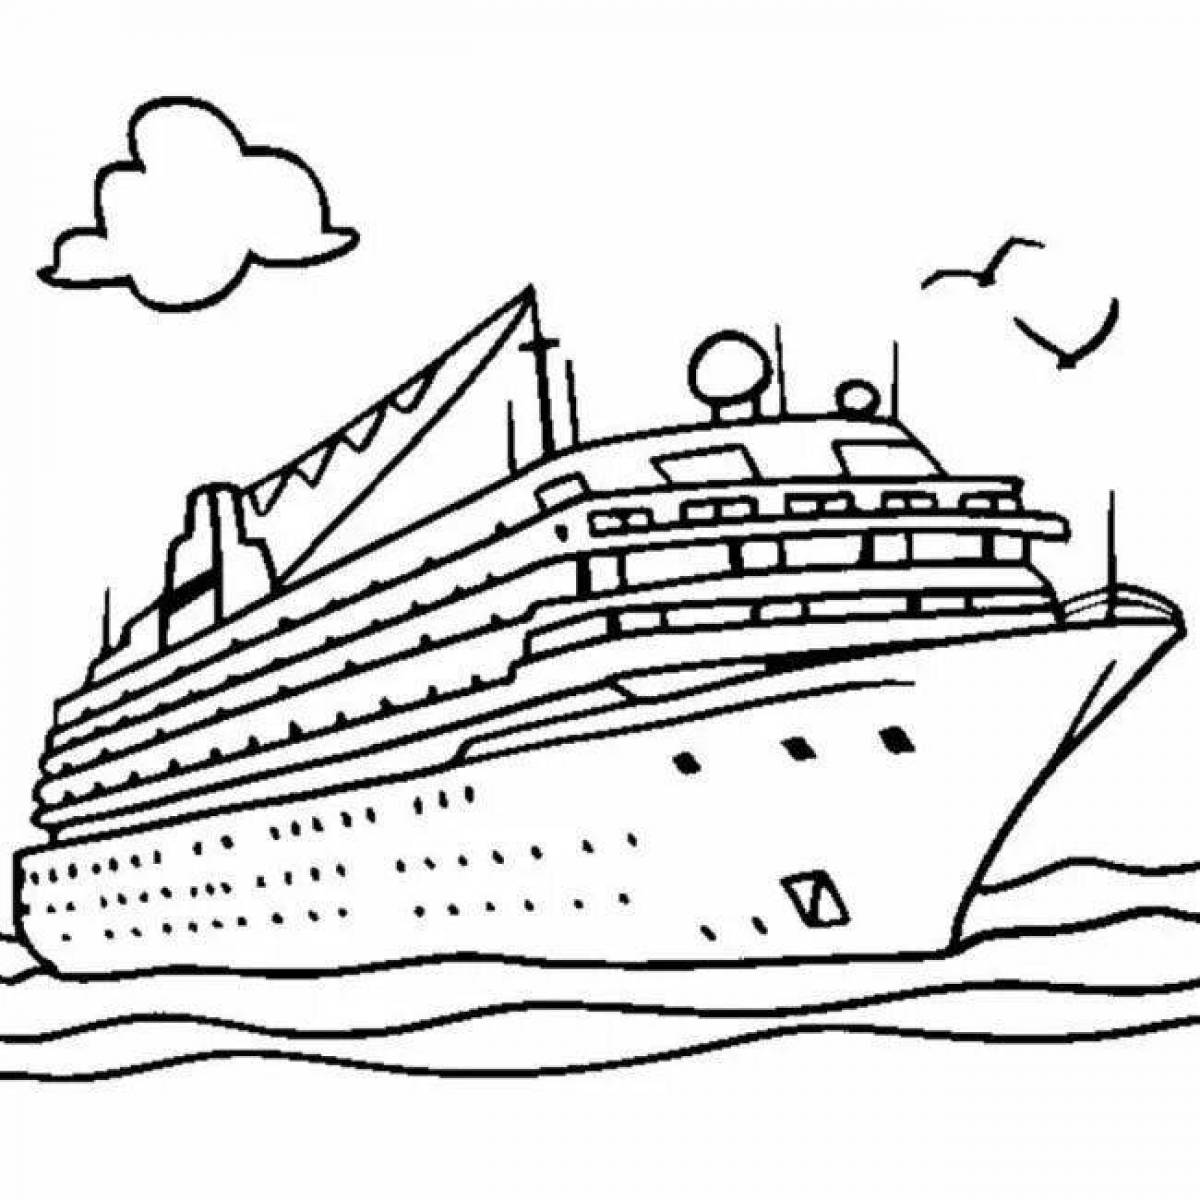 Complex ships coloring page